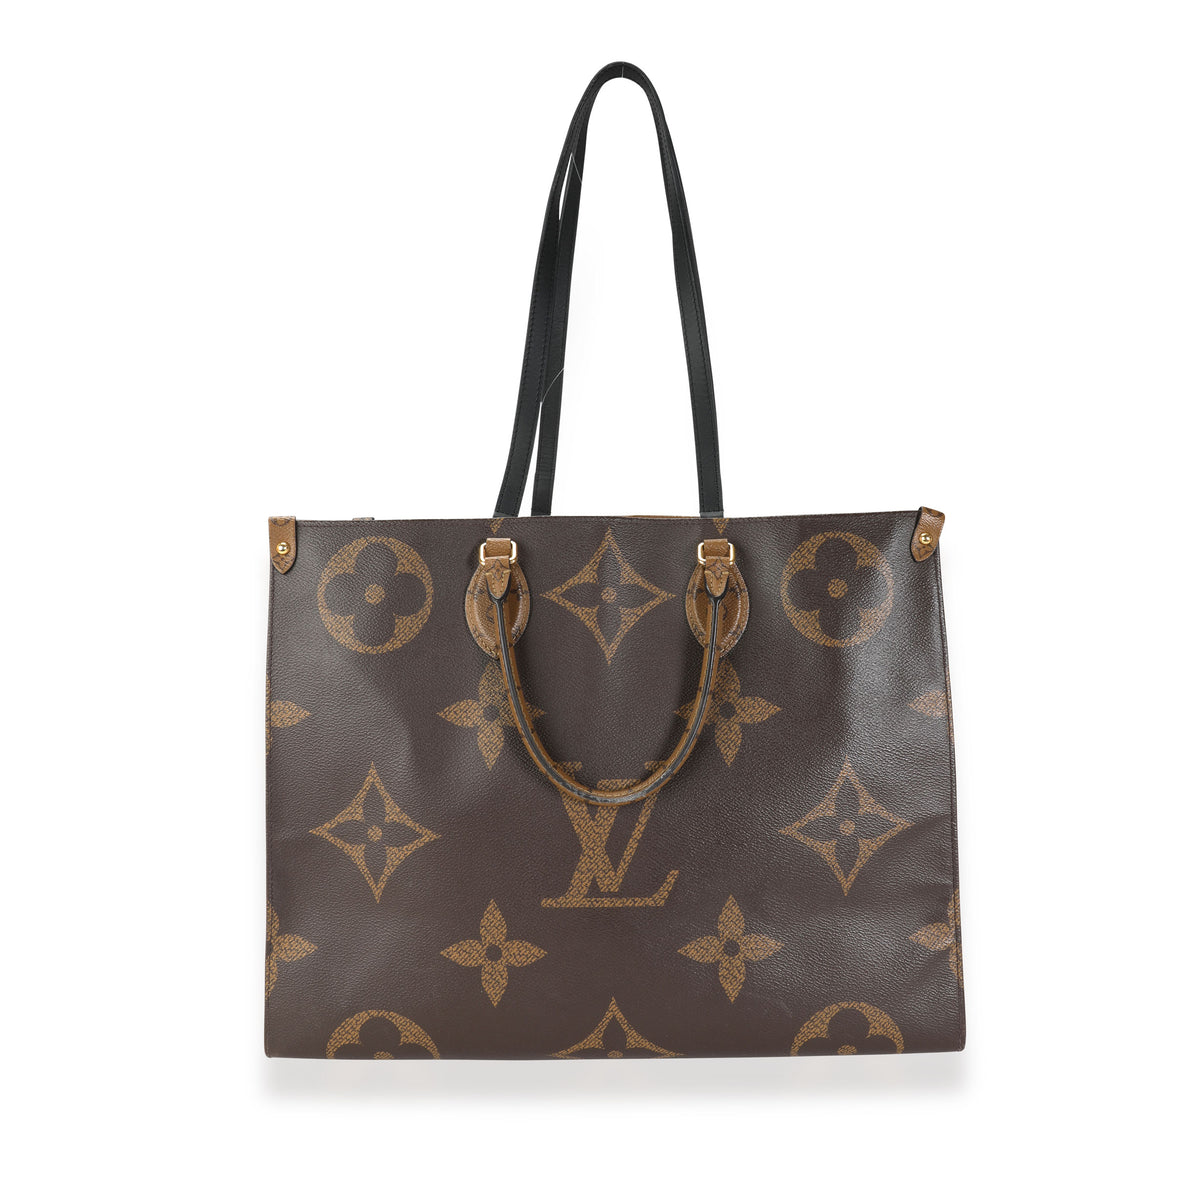 Louis Vuitton - Authenticated OnTheGo Handbag - Cloth Brown for Women, Very Good Condition